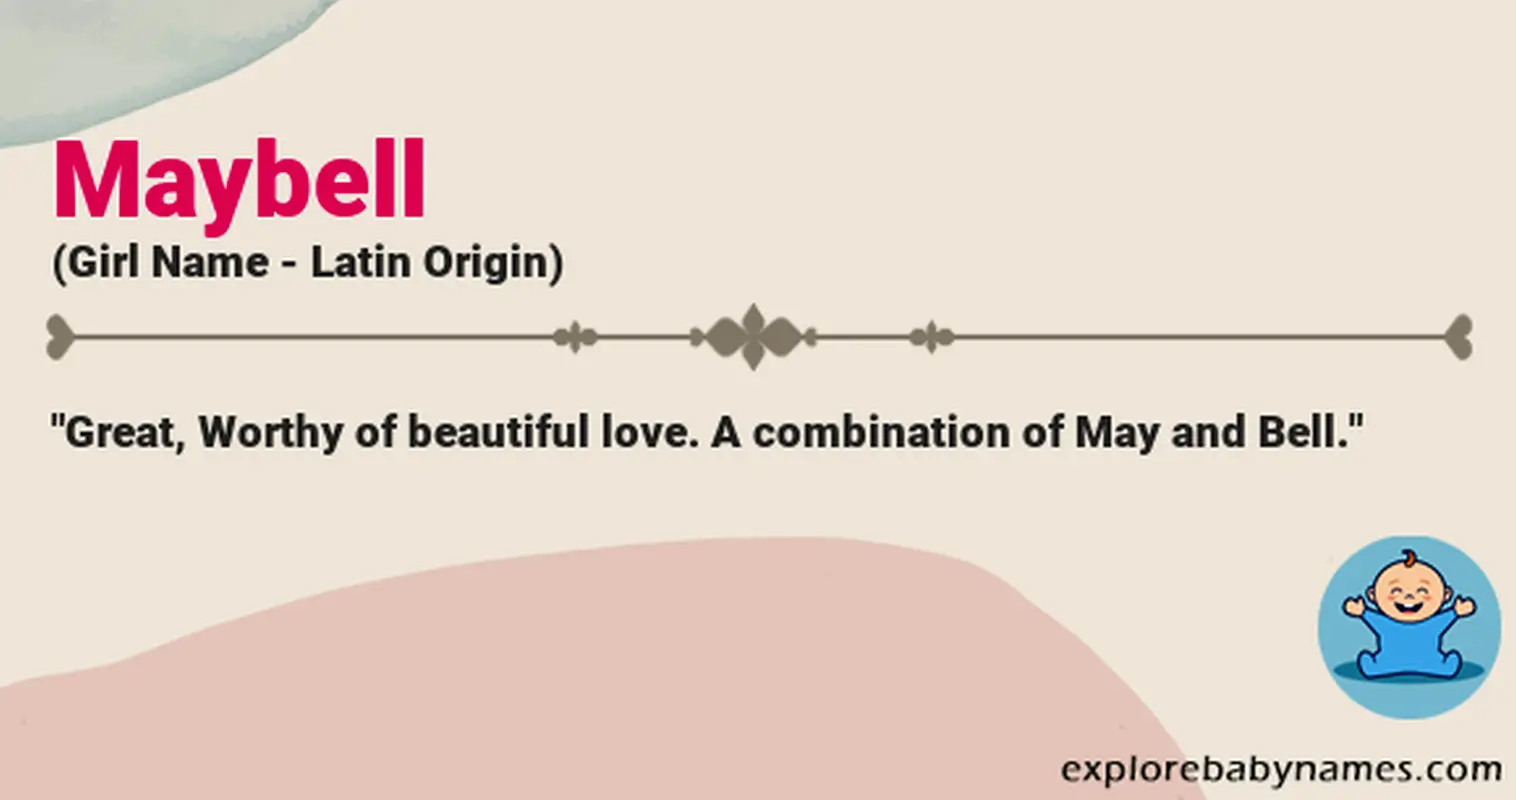 Meaning of Maybell